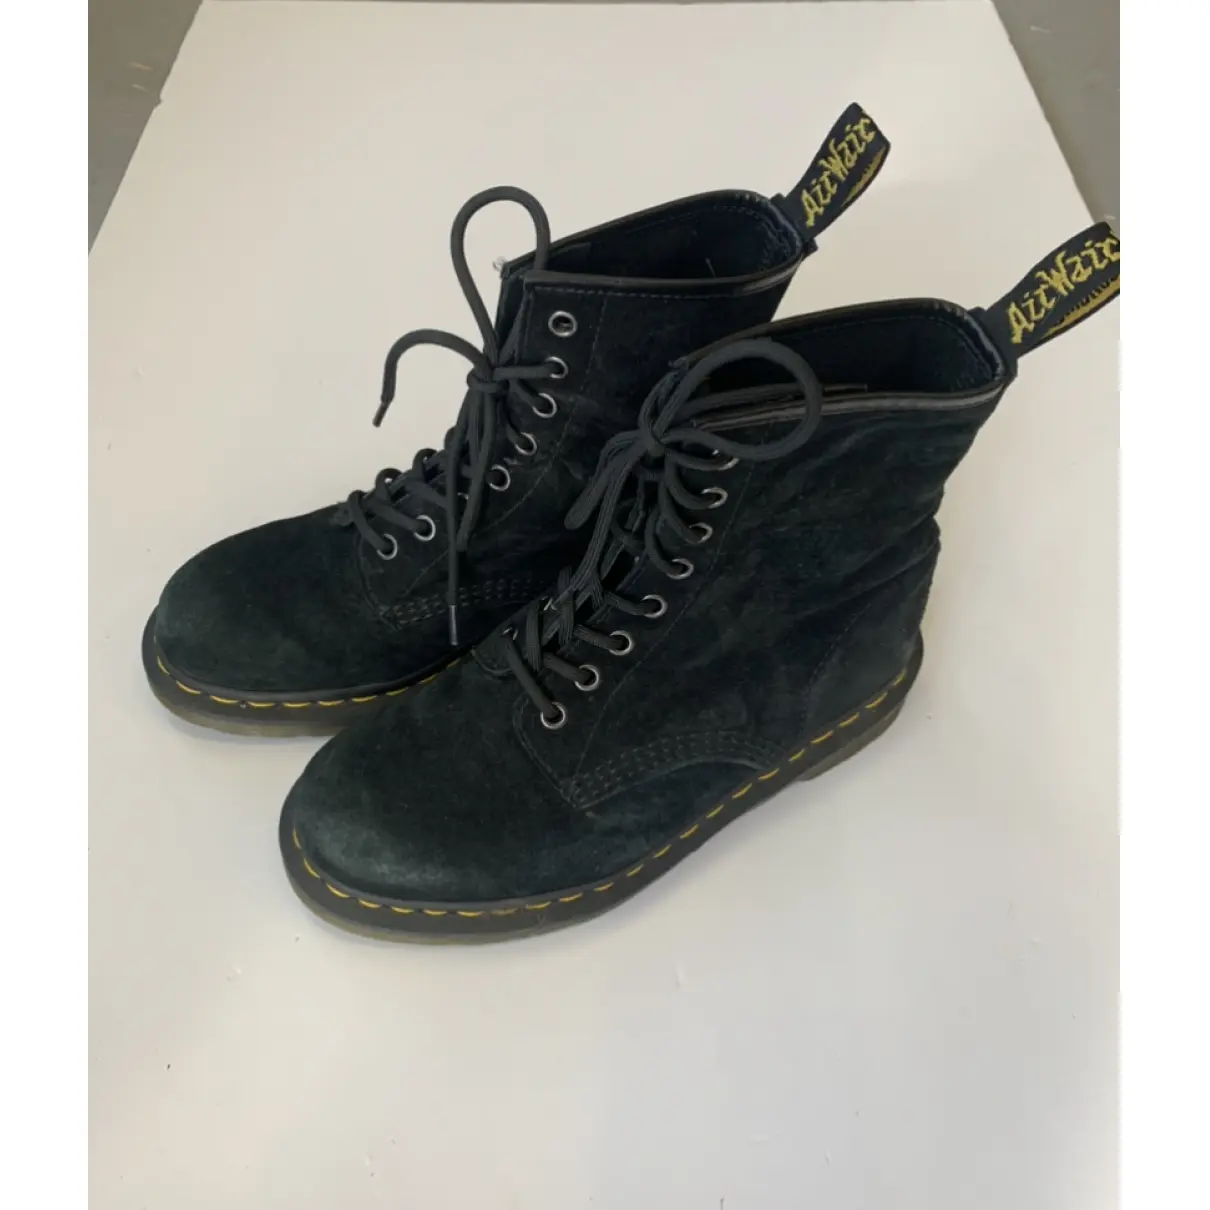 Buy Dr. Martens 1460 Pascal (8 eye) ankle boots online